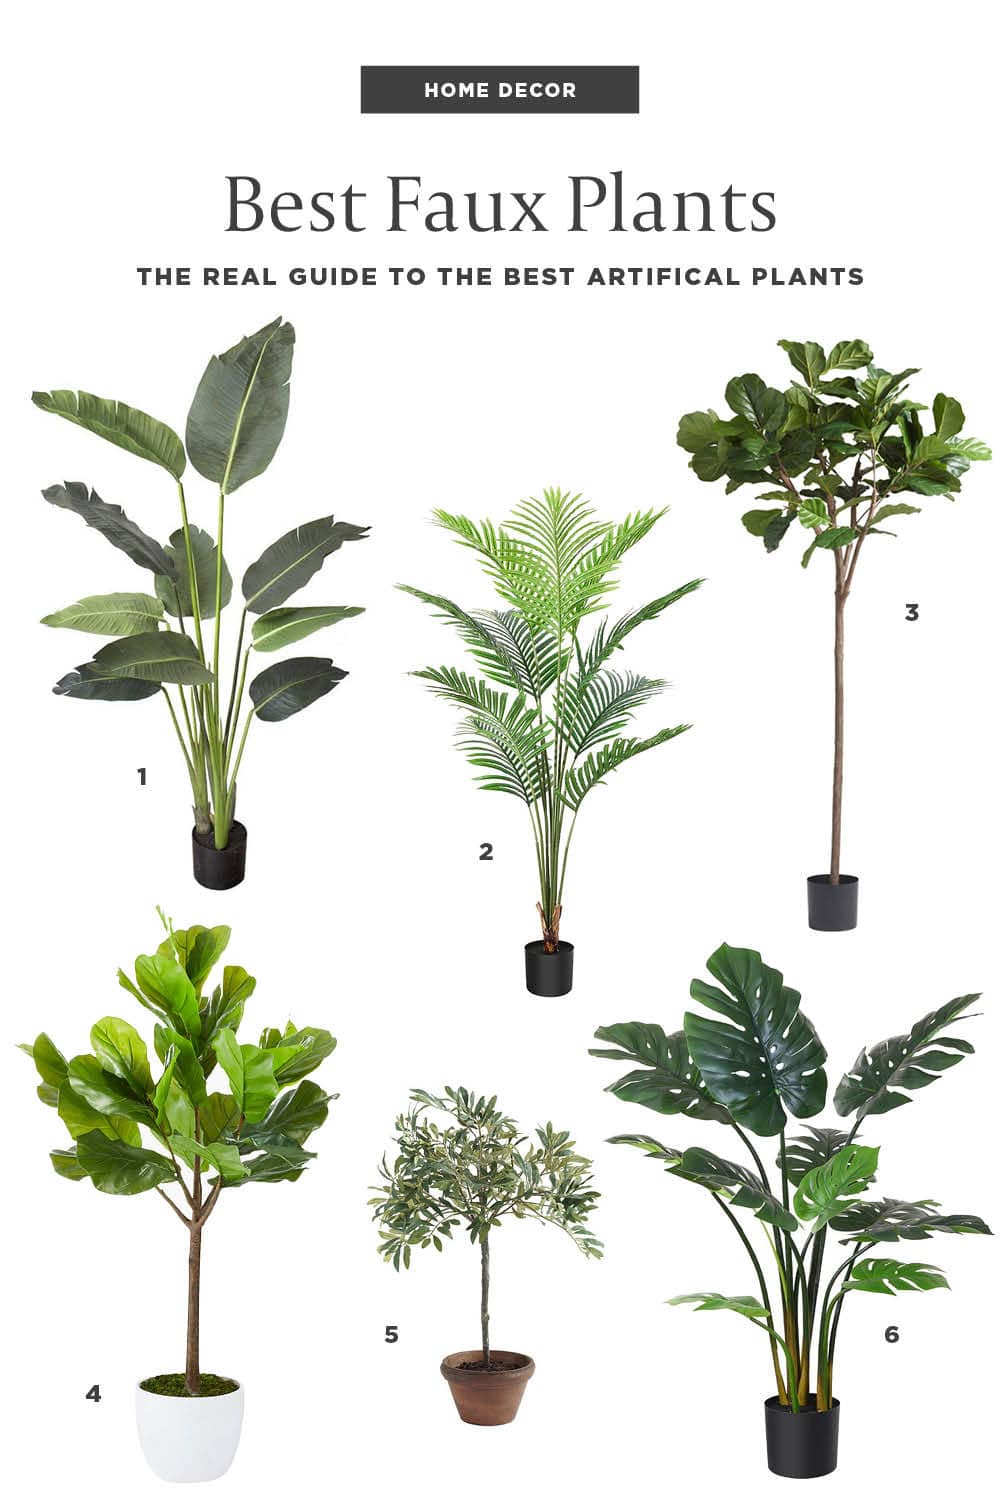 guide to the best faux plants that look real